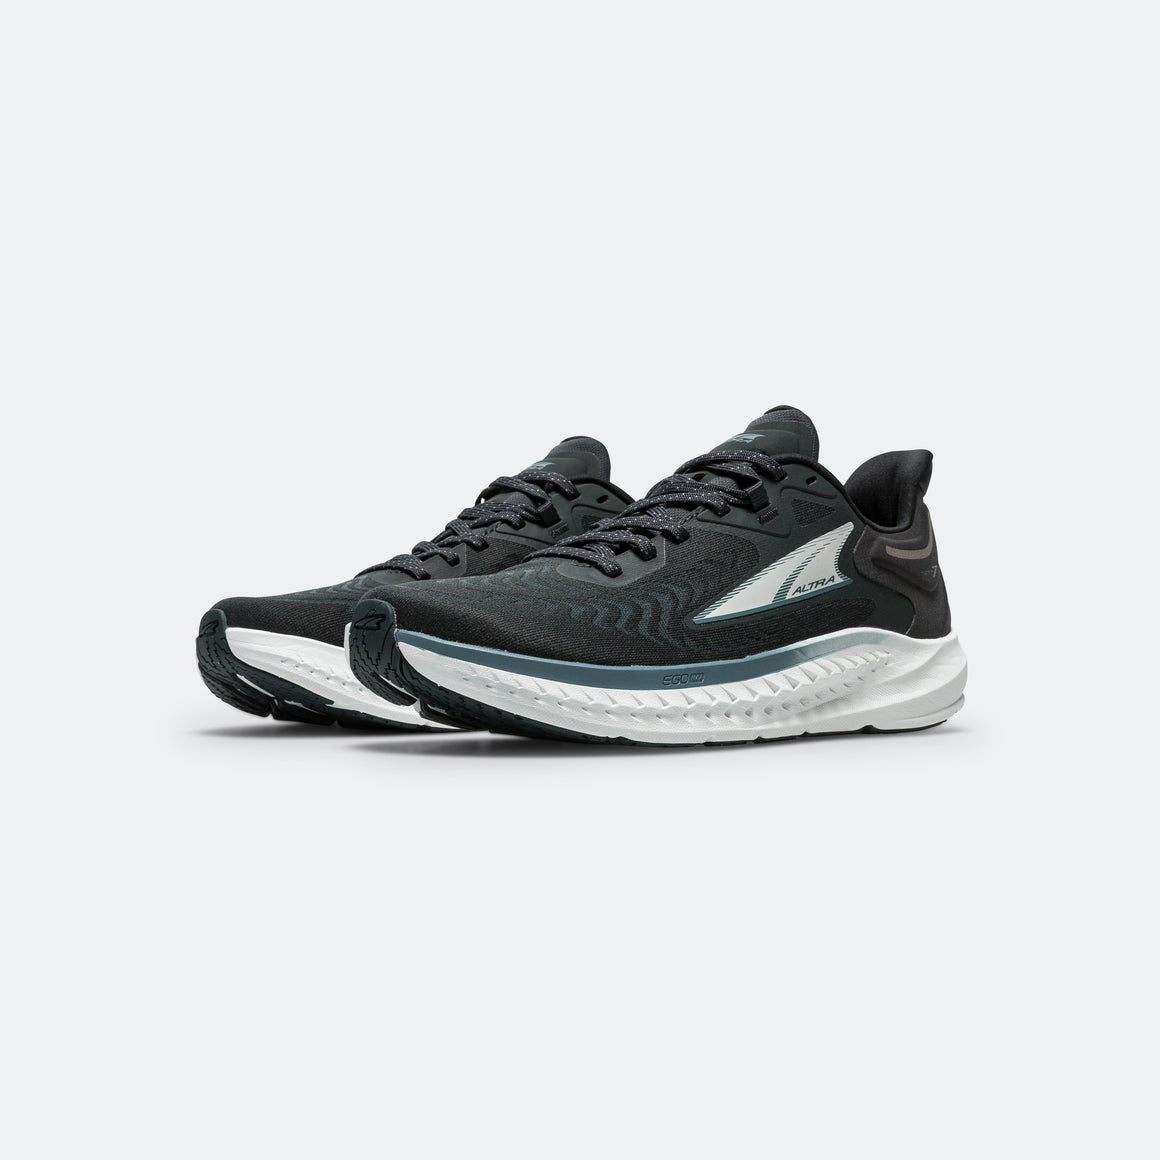 Altra - Womens Torin 7 - Black - Up There Athletics